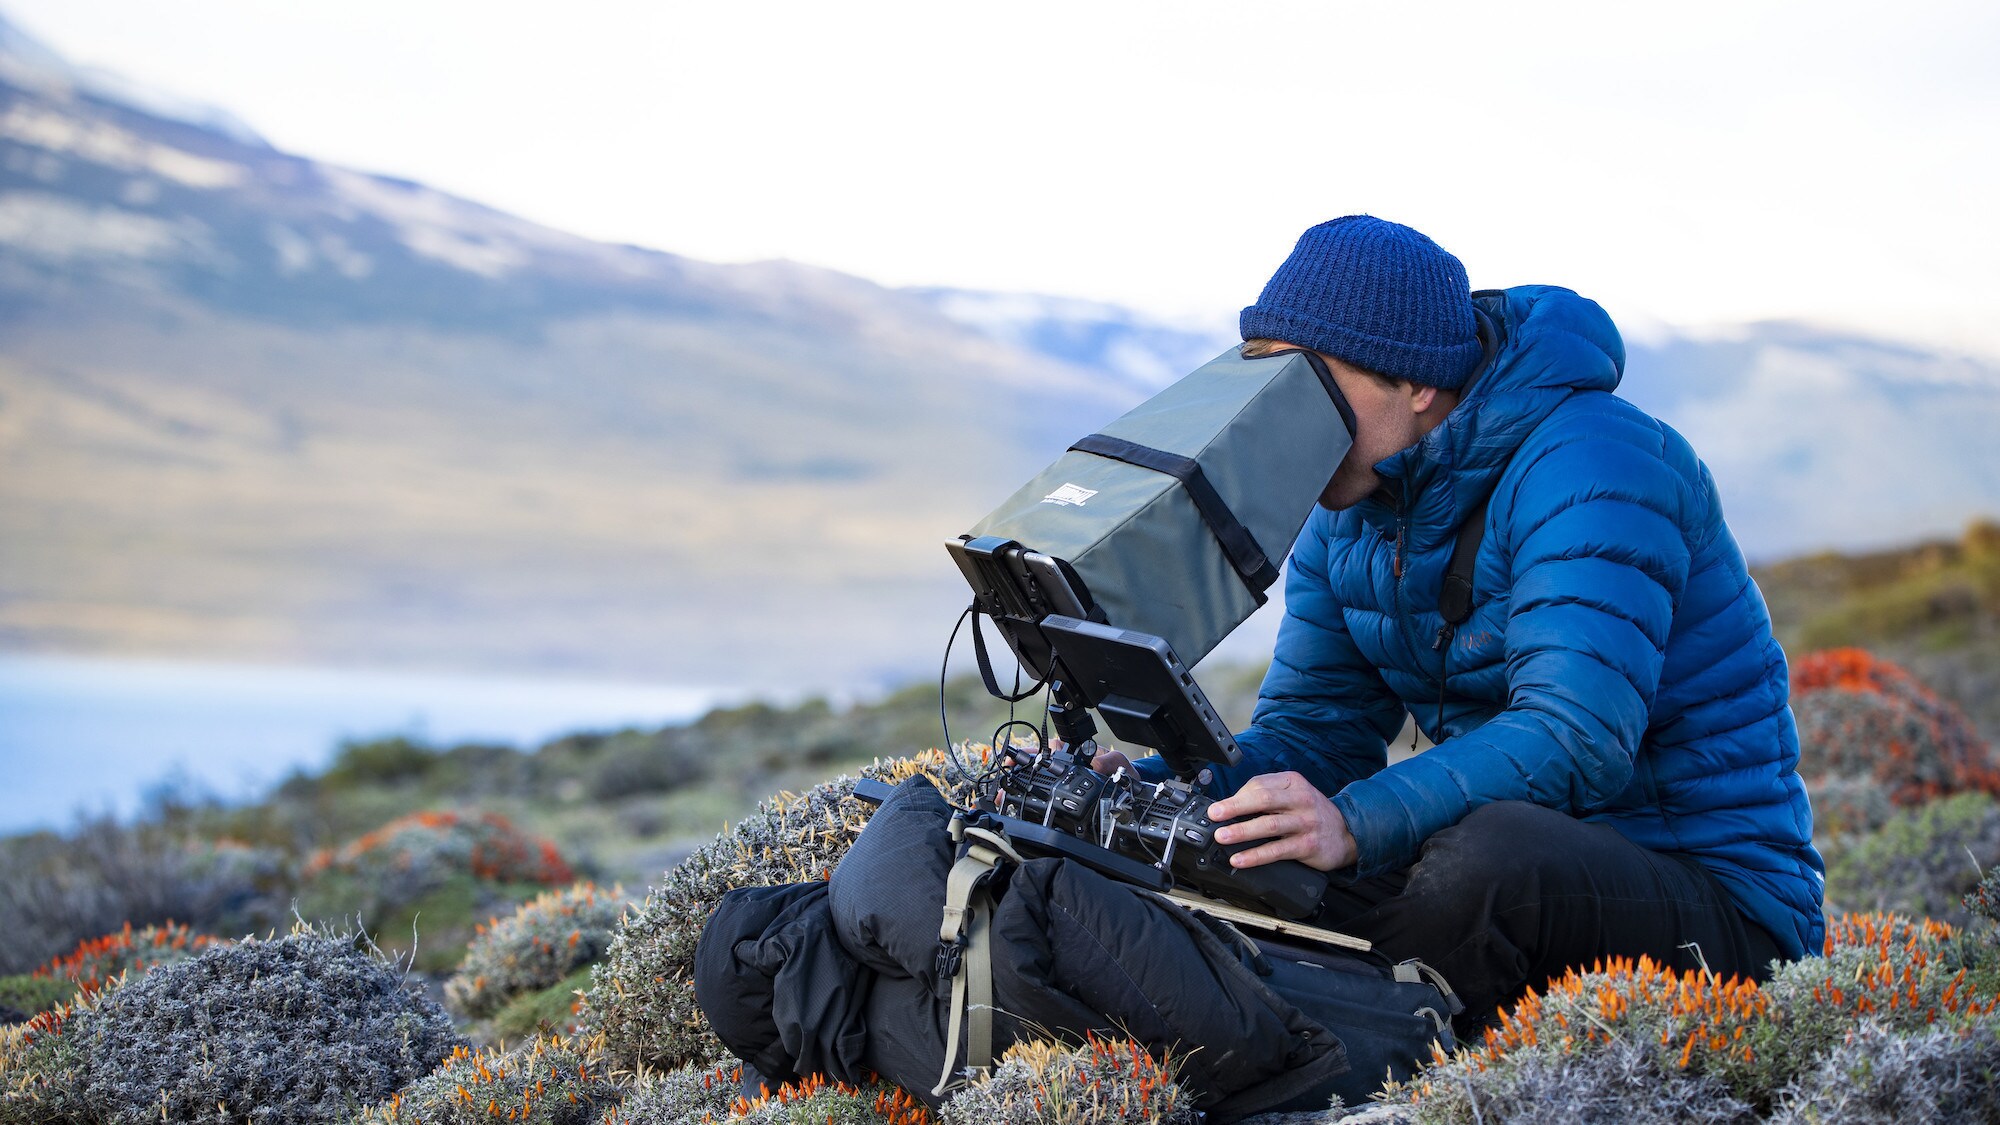 Bertie Gregory viewing the drone through a monitor in Patagonia. (National Geographic for Disney+/Anna Dimitriadis)